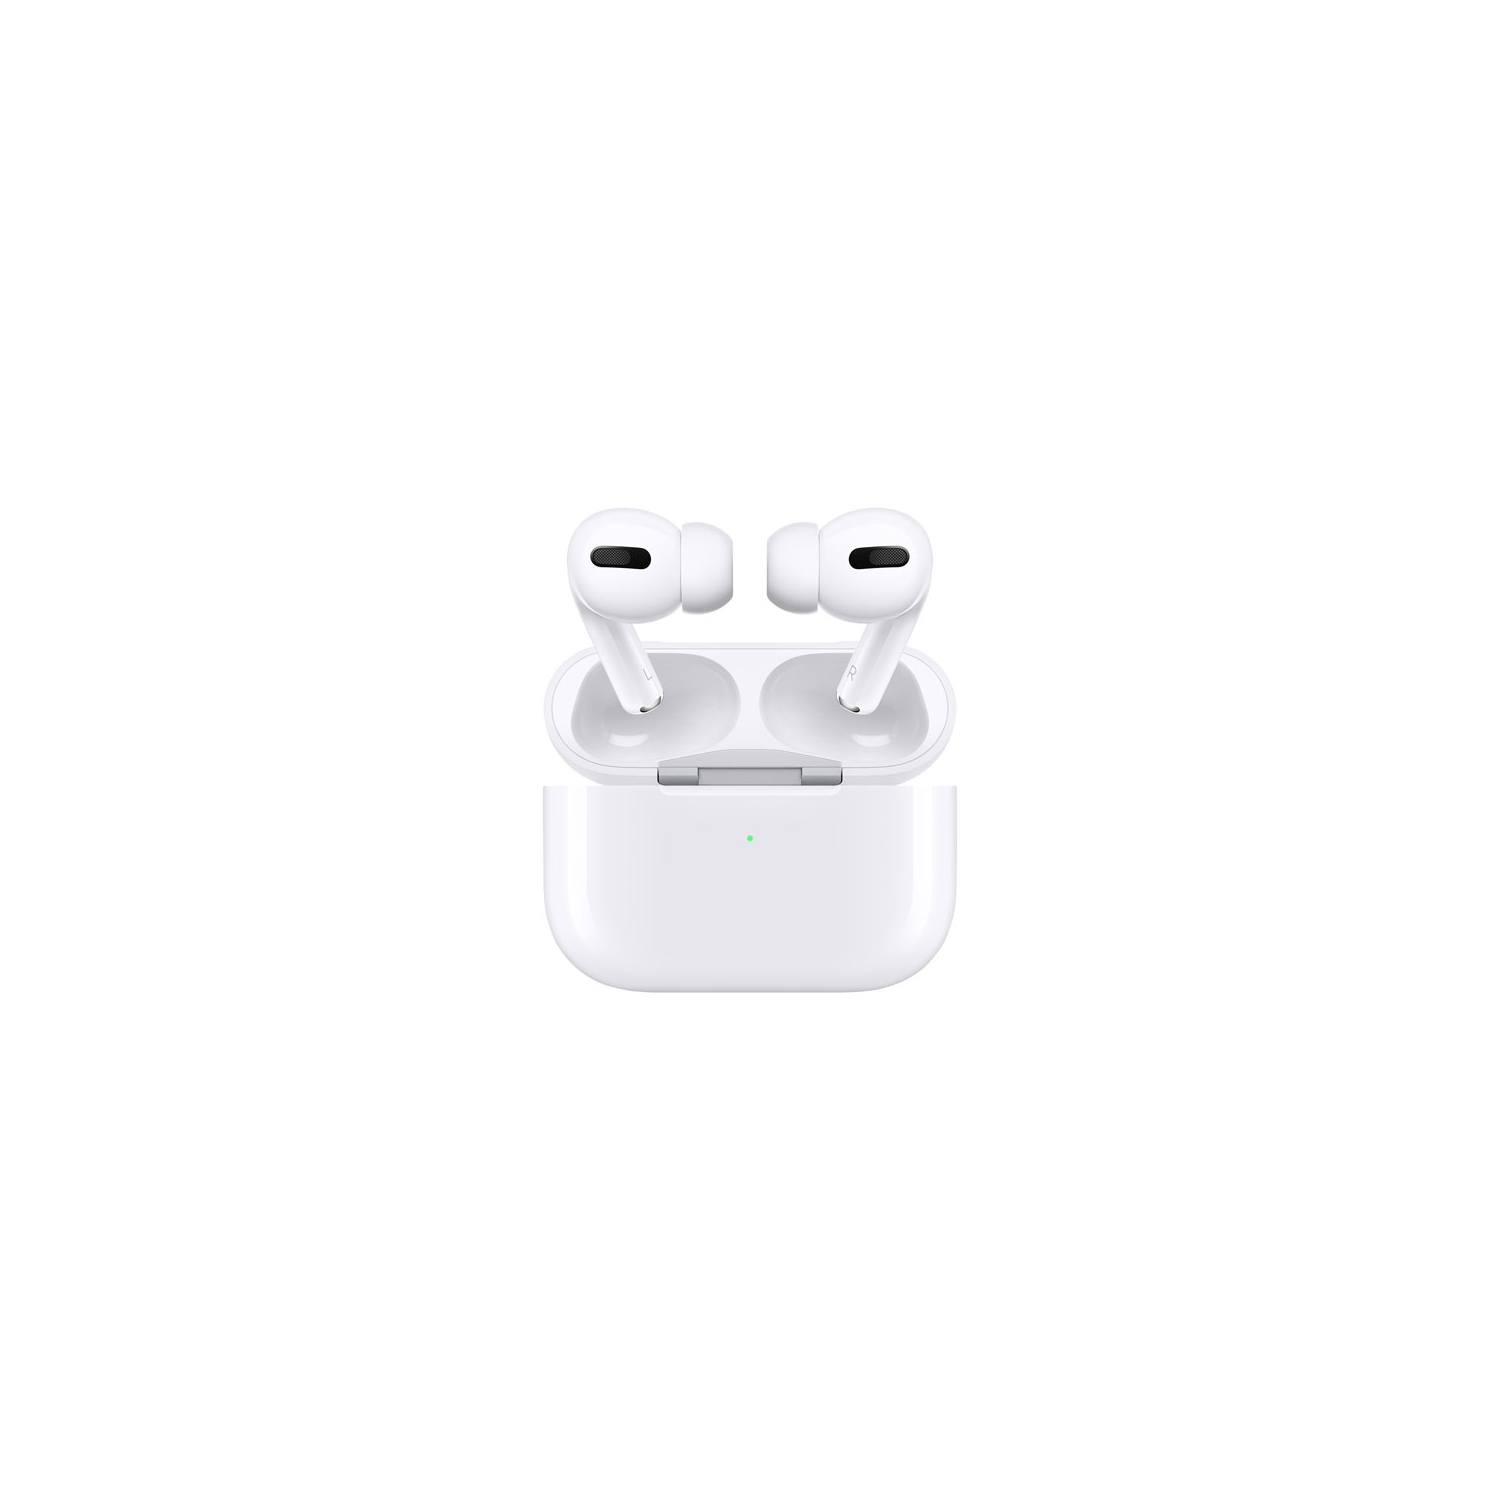 Refurbished (Excellent) - Apple AirPods Pro In-Ear Noise Cancelling True Wireless Earbuds with MagSafe Charging Case - White